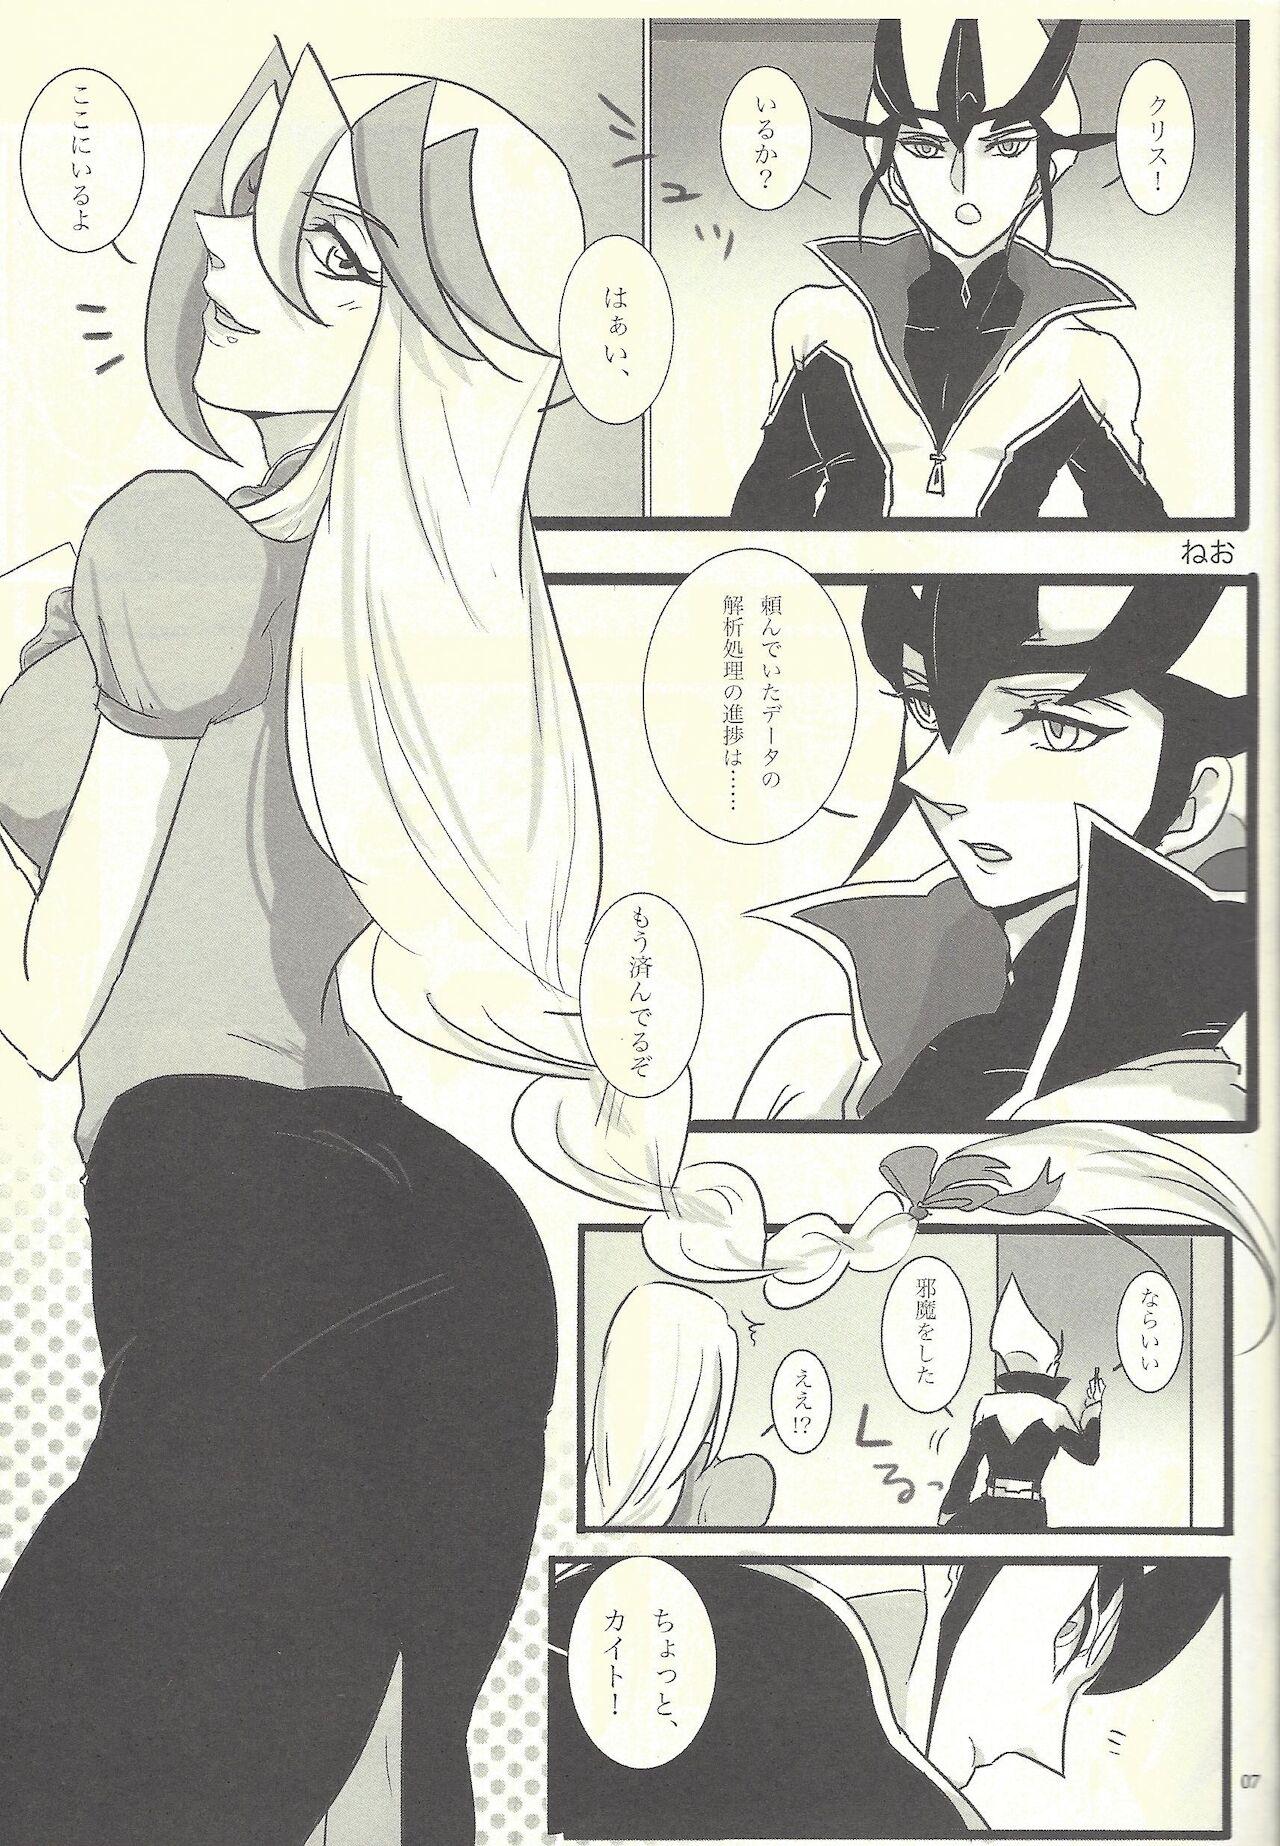 Fetish The hidden Garden of Femme Fatale - Yu gi oh zexal Party - Page 6